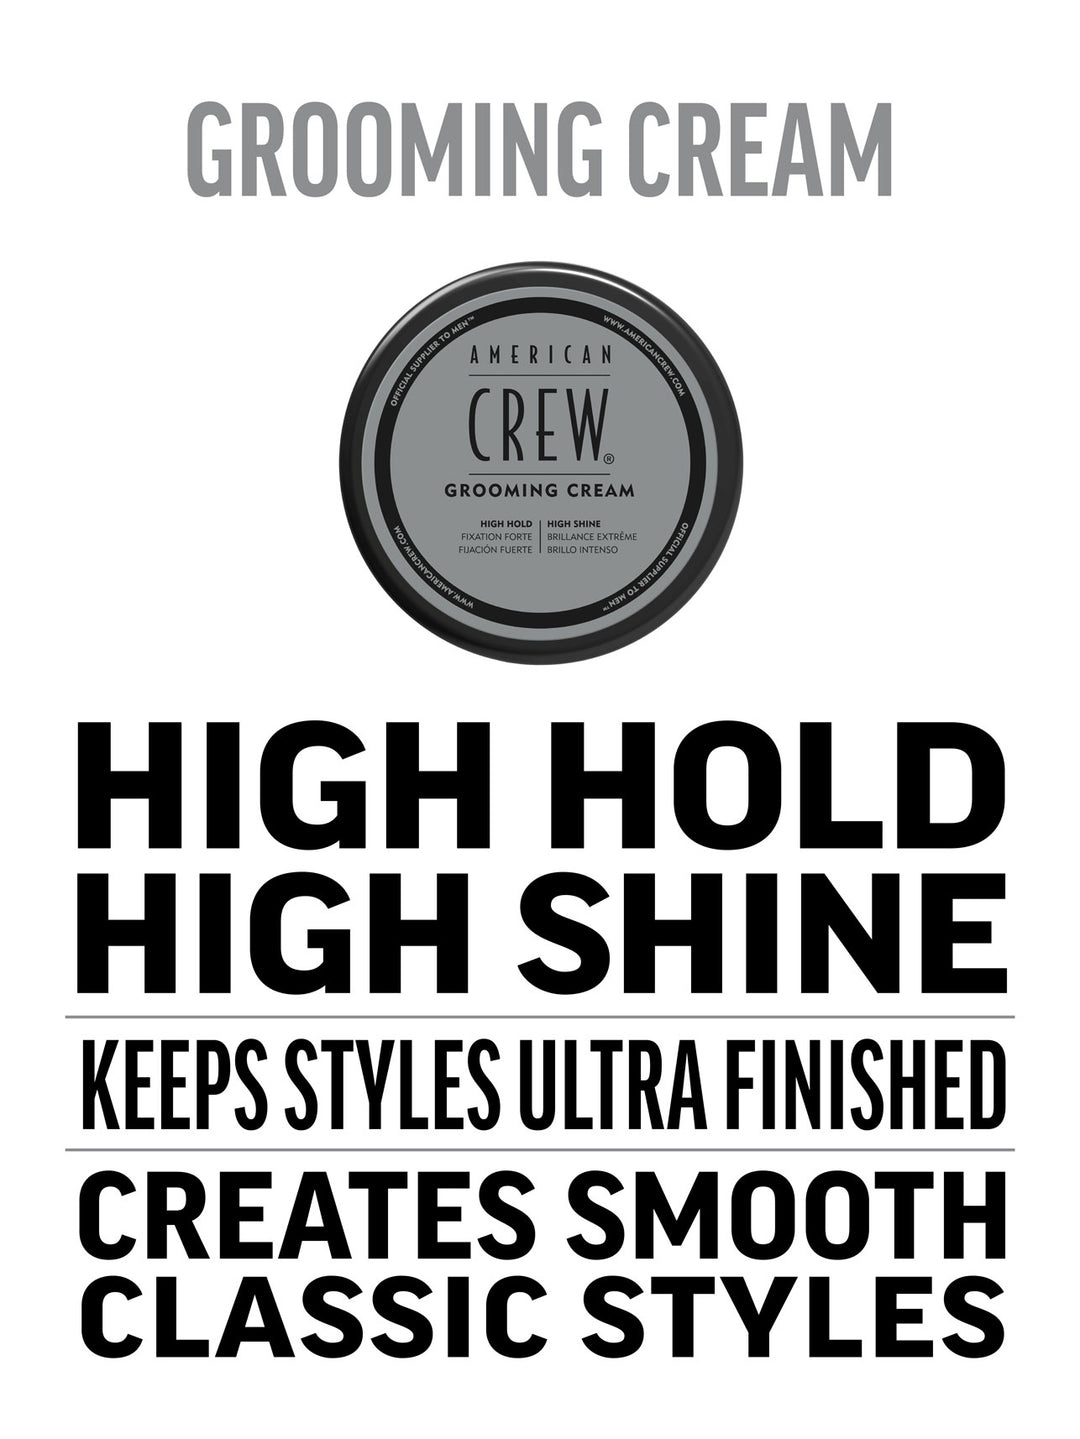 Grooming Cream provides high hold, high shine, keeps styles ultra finished and creates smooth classic styles.